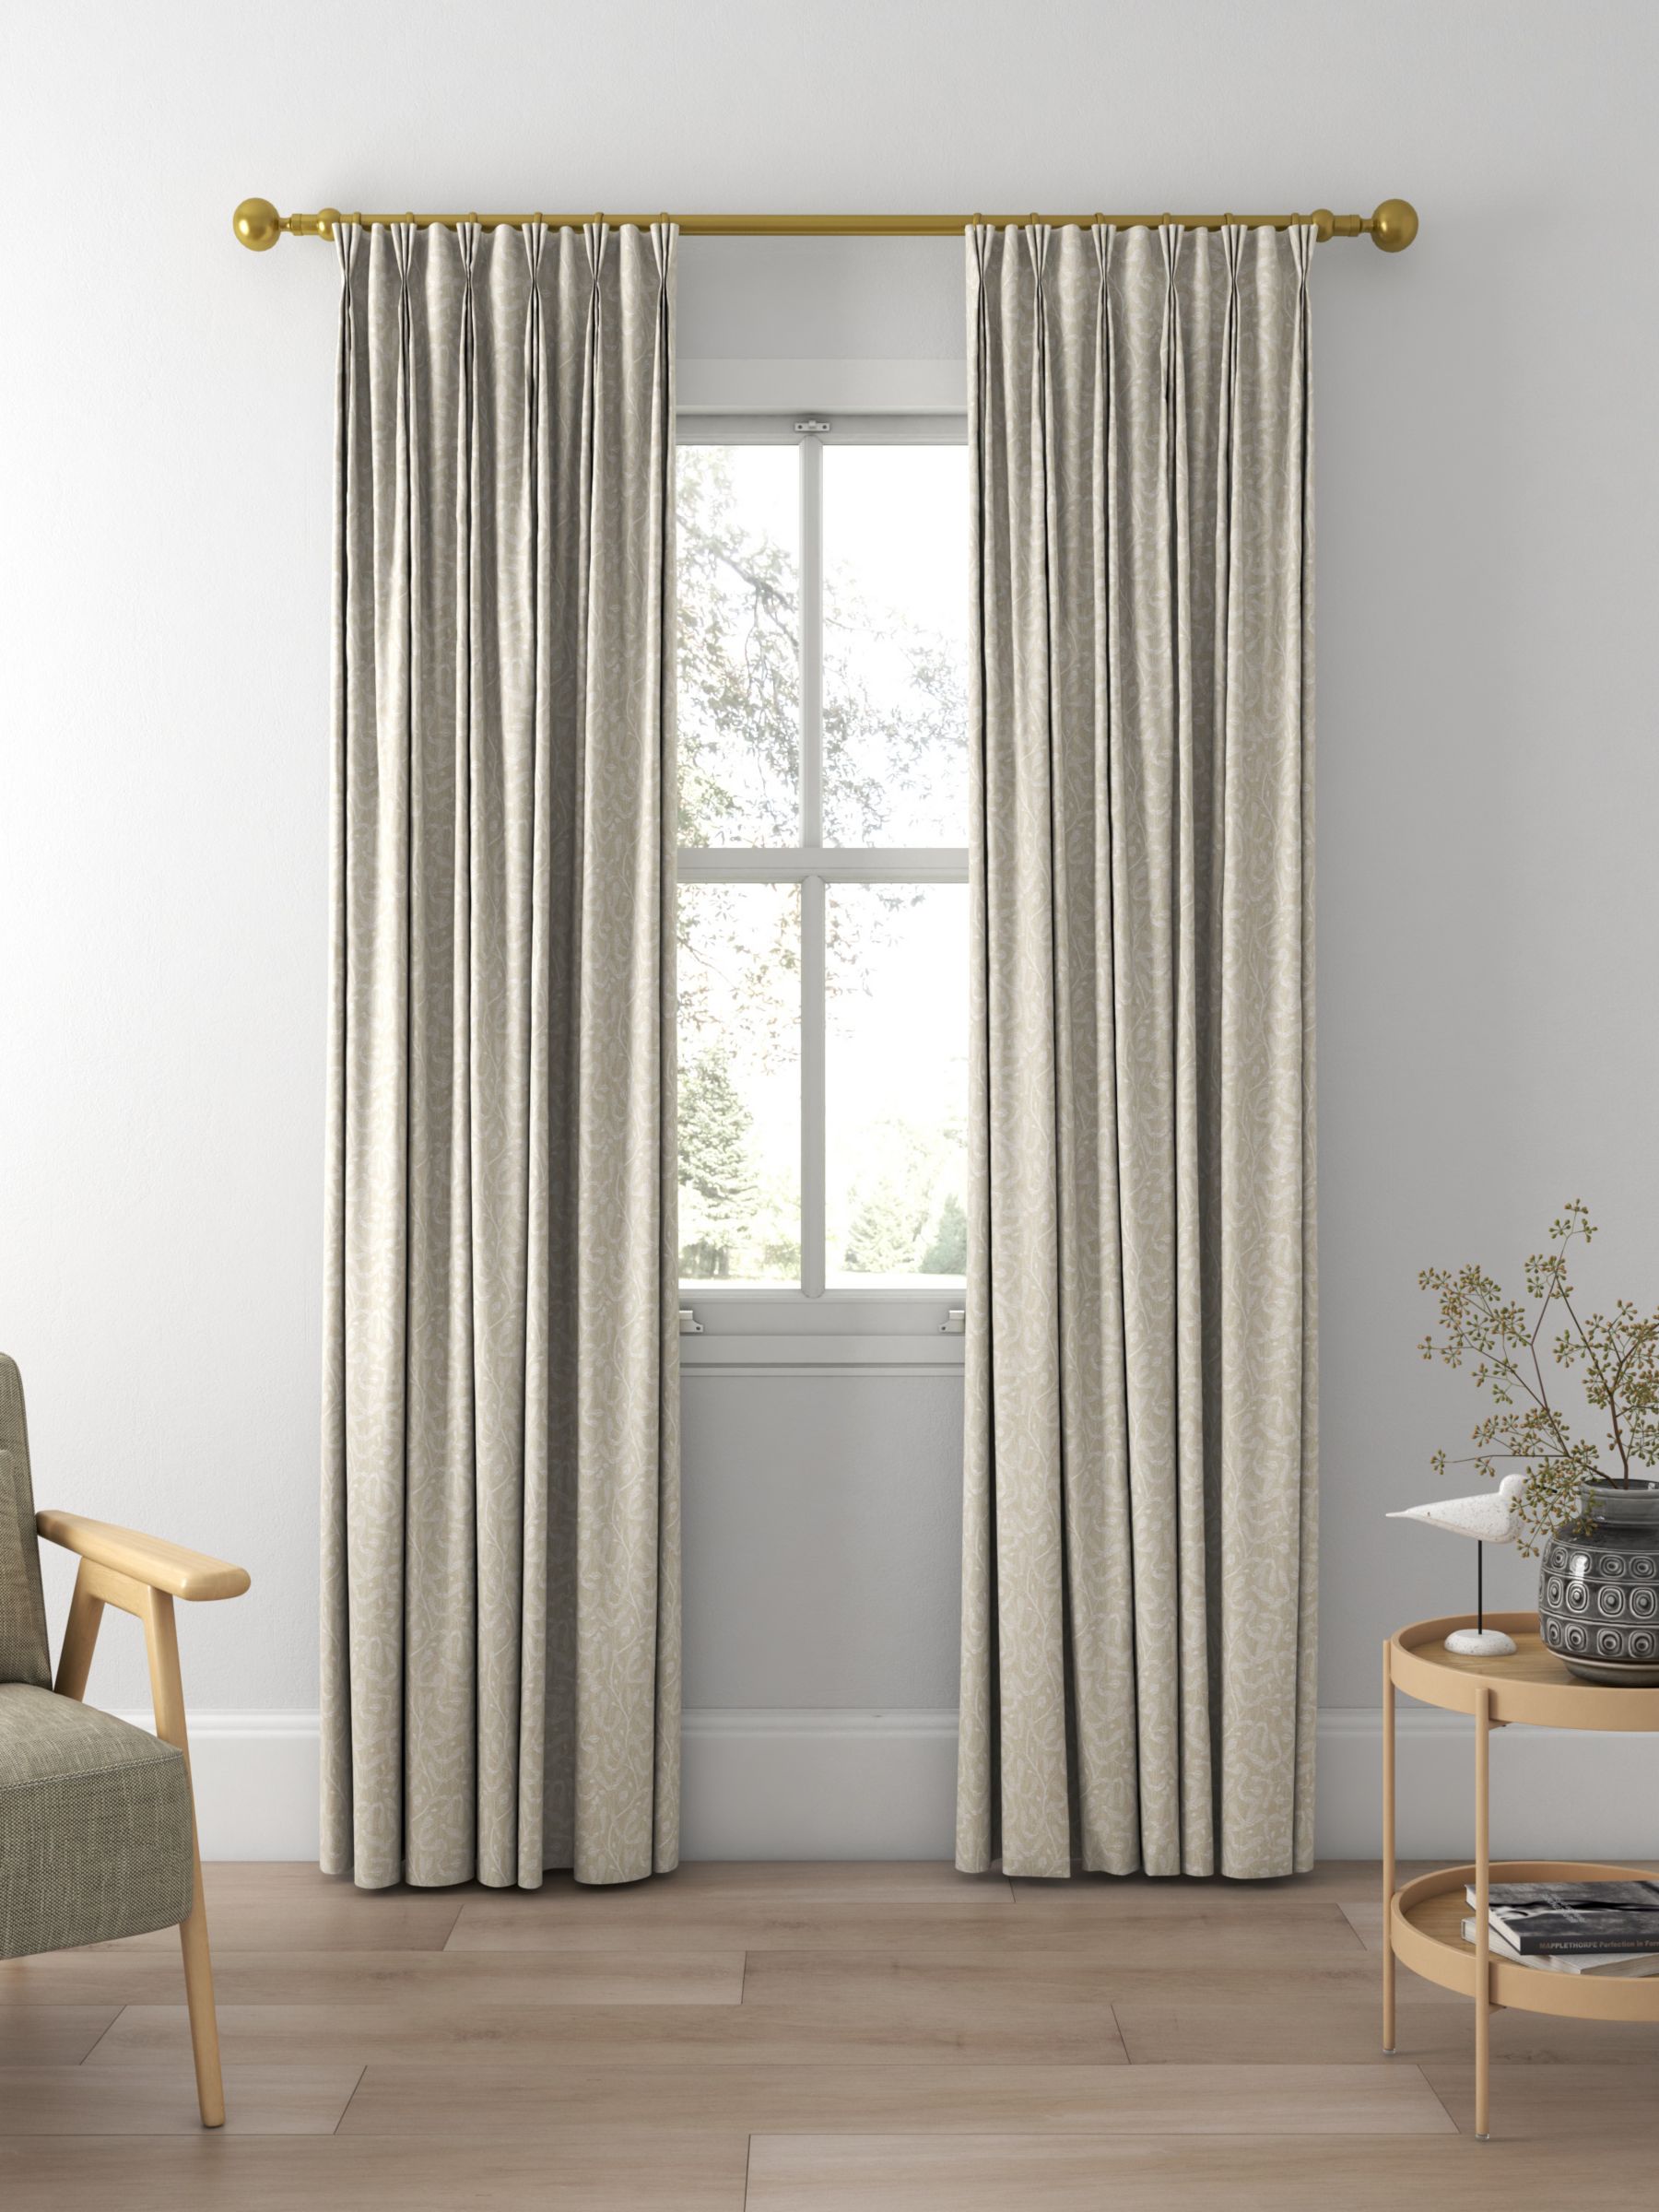 Sanderson Trailing Sycamore Made to Measure Curtains, Linen